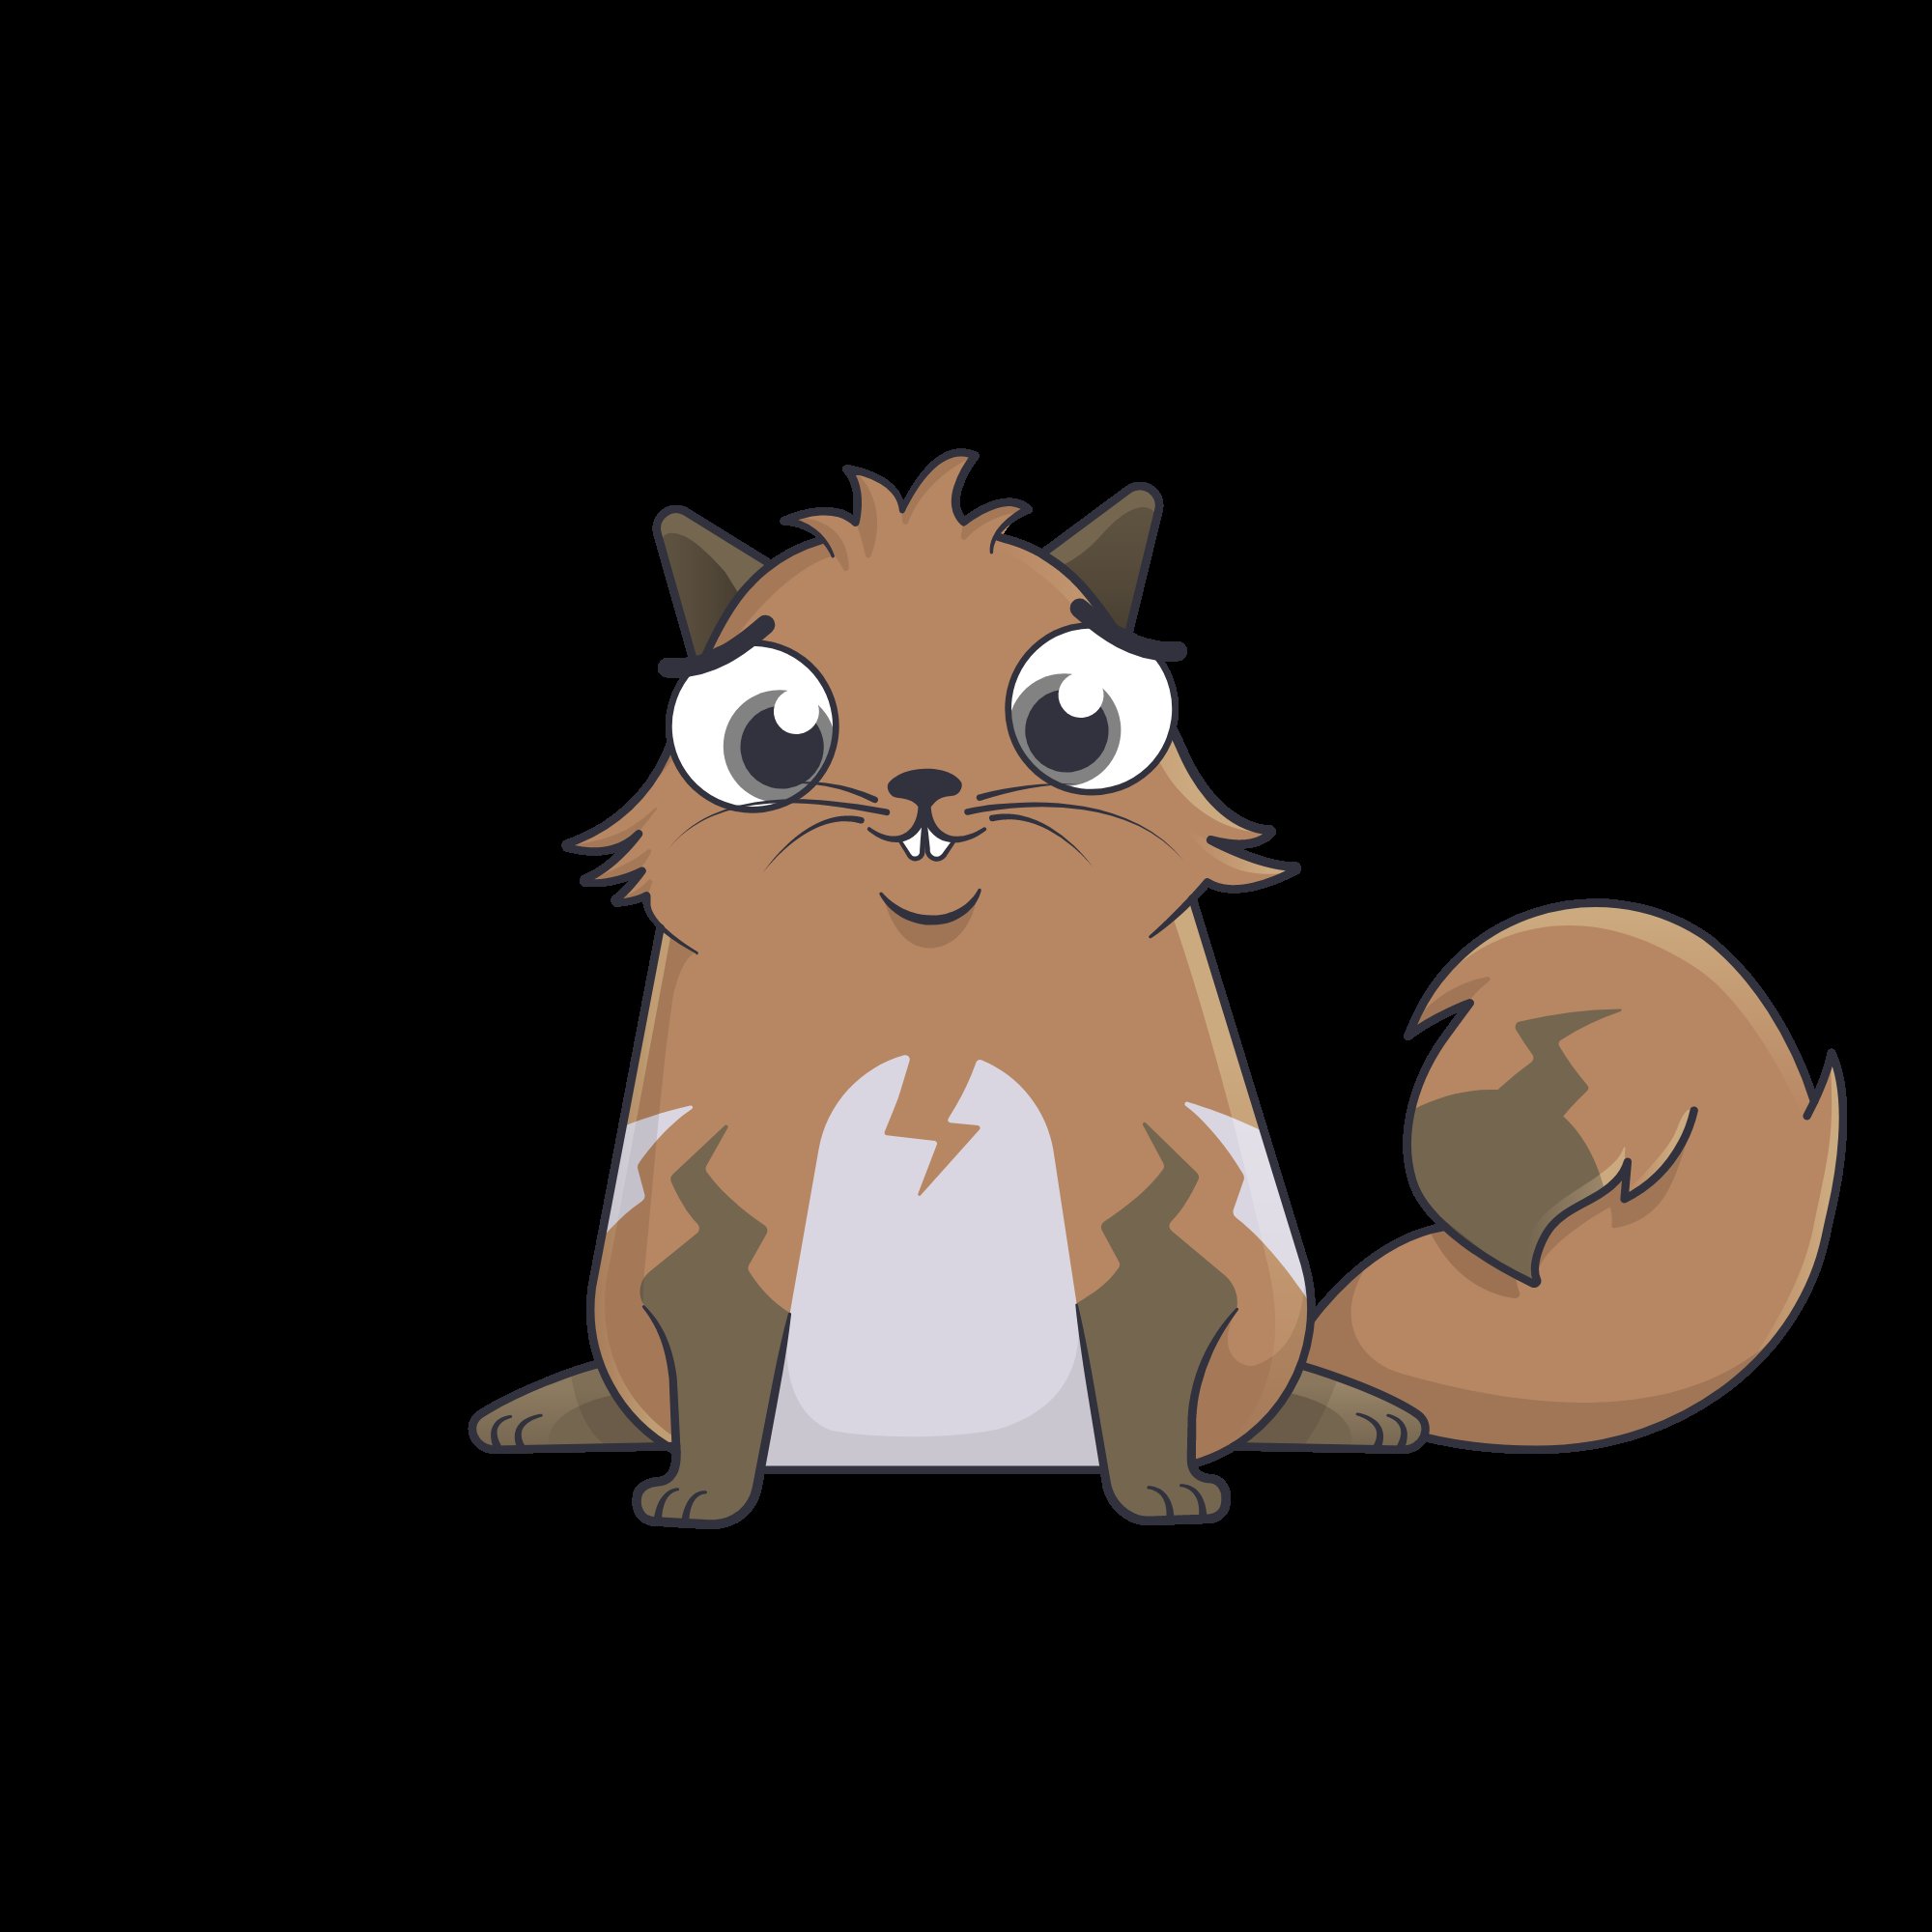 One of the Cryptokitties NFTs